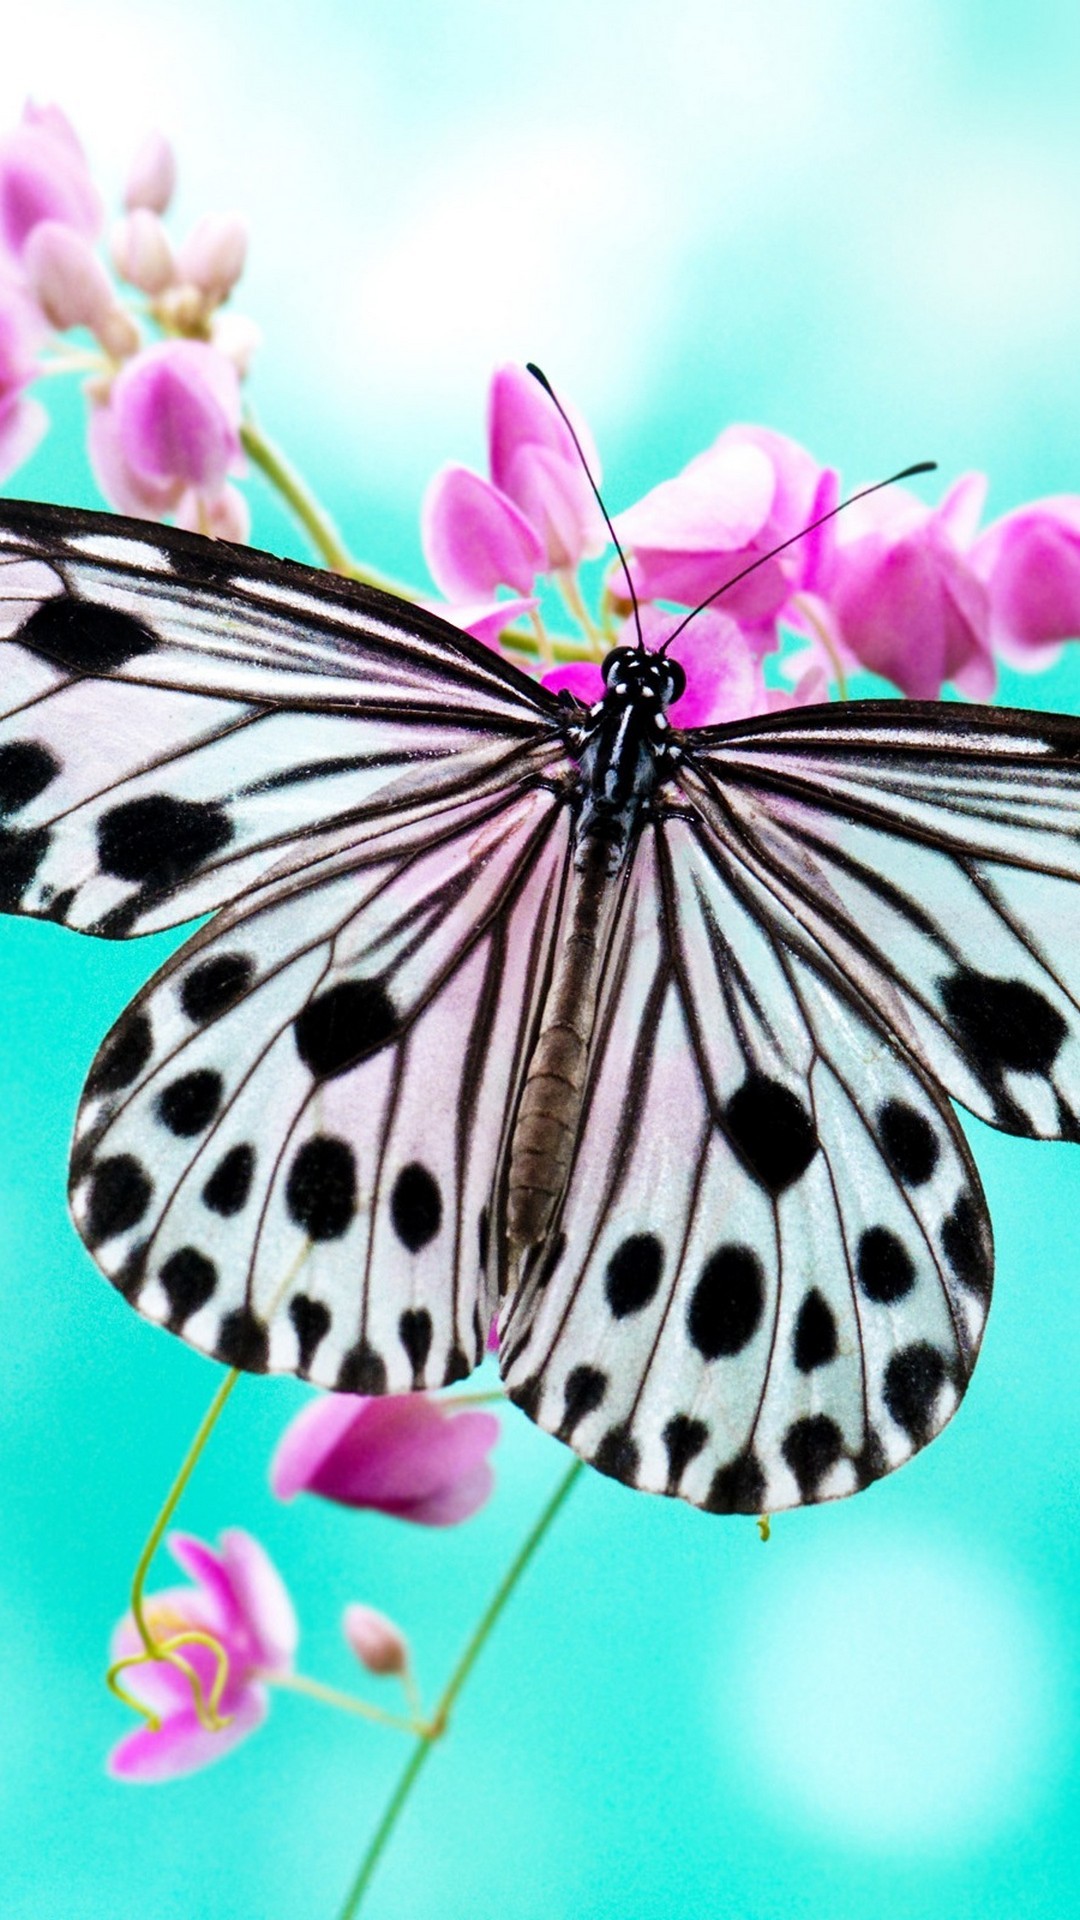 iPhone Wallpaper Butterfly Pictures with HD Resolution 1080X1920